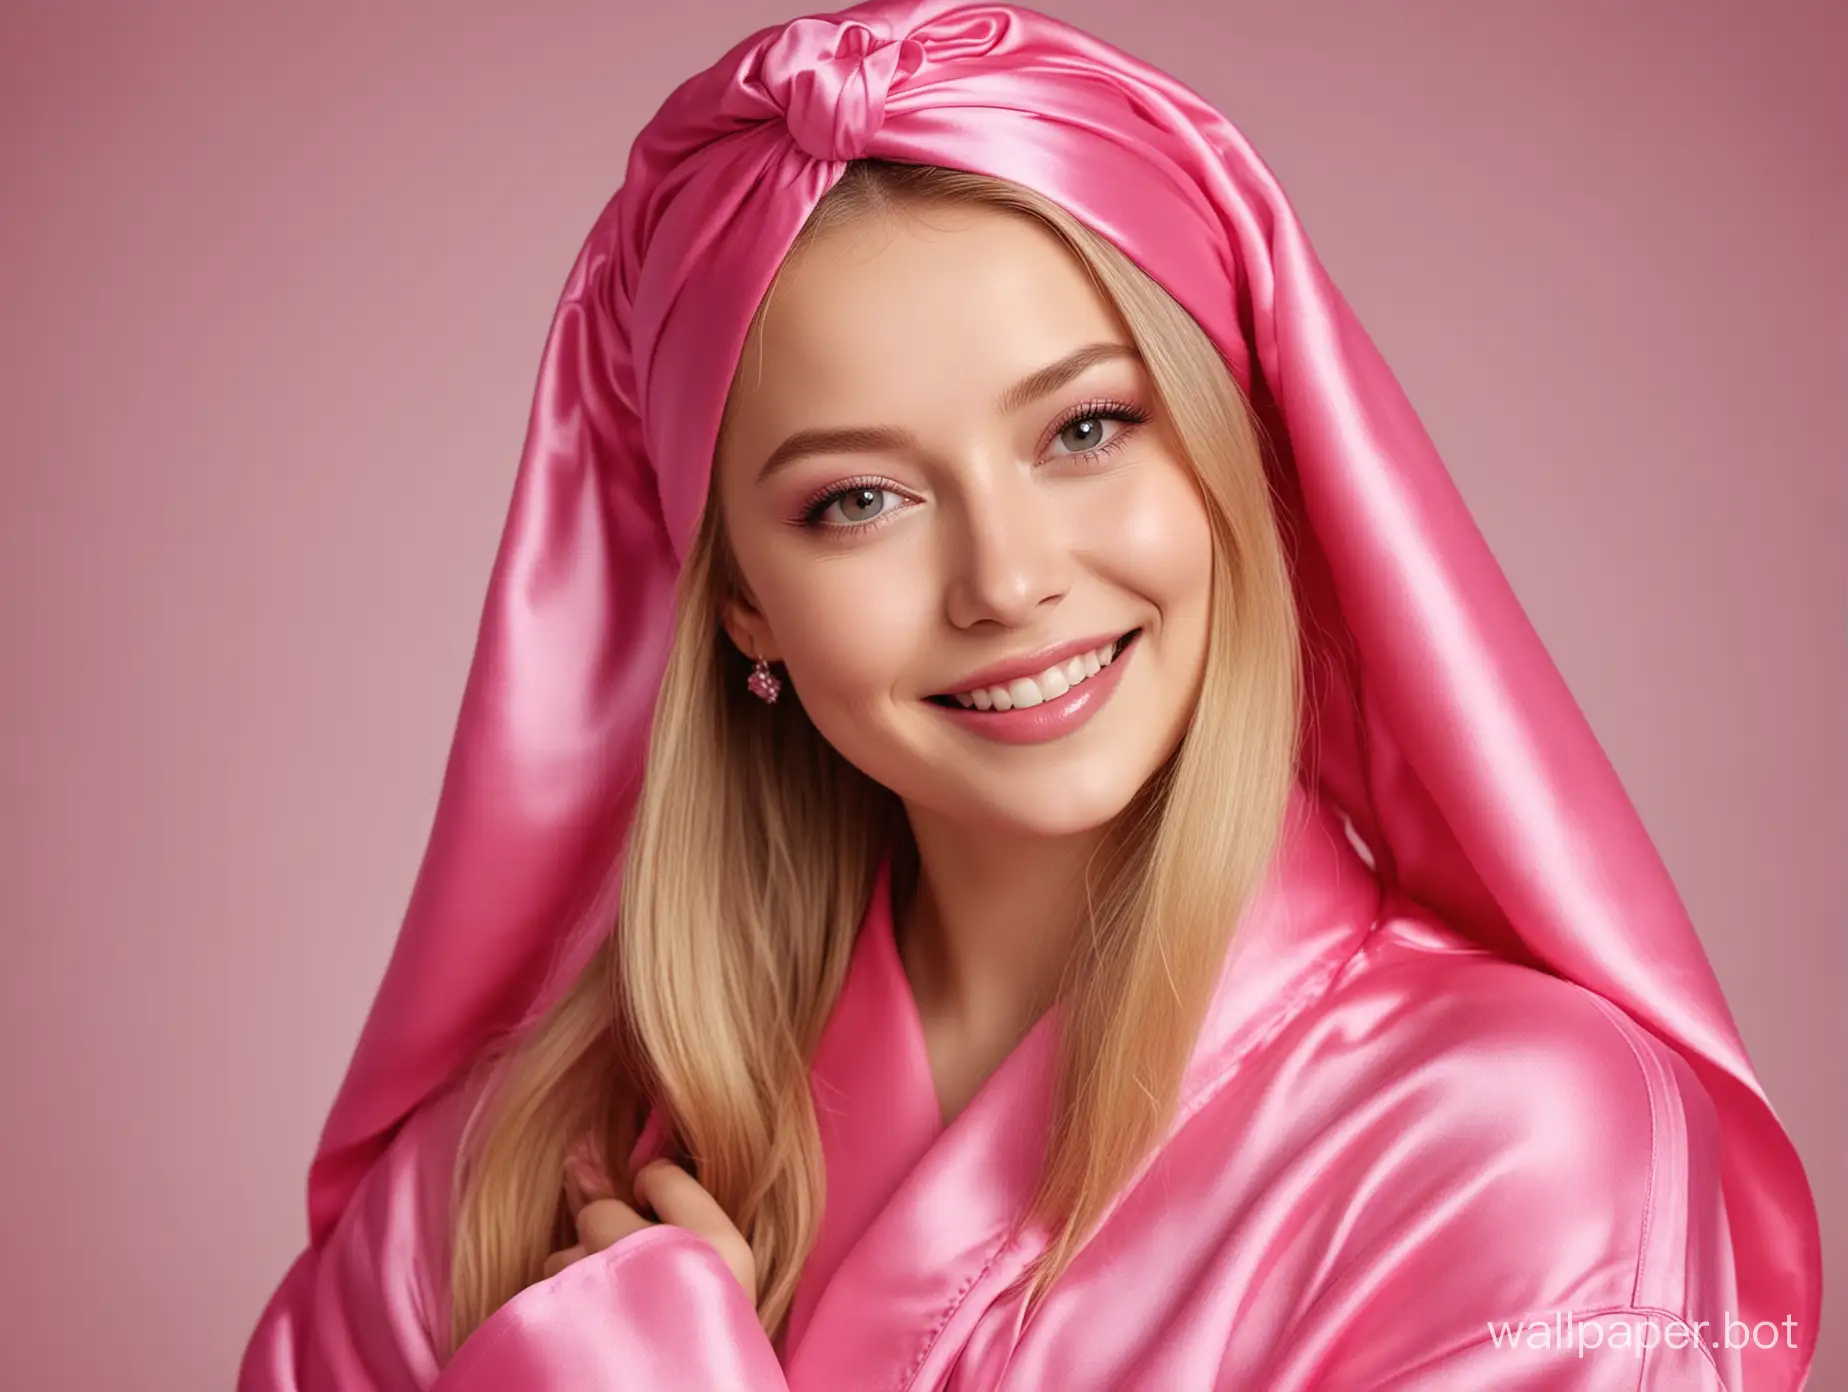 Radiant-Portrait-of-Young-Queen-Yulia-Lipnitskaya-in-Pink-Silk-Robe-and-Turban